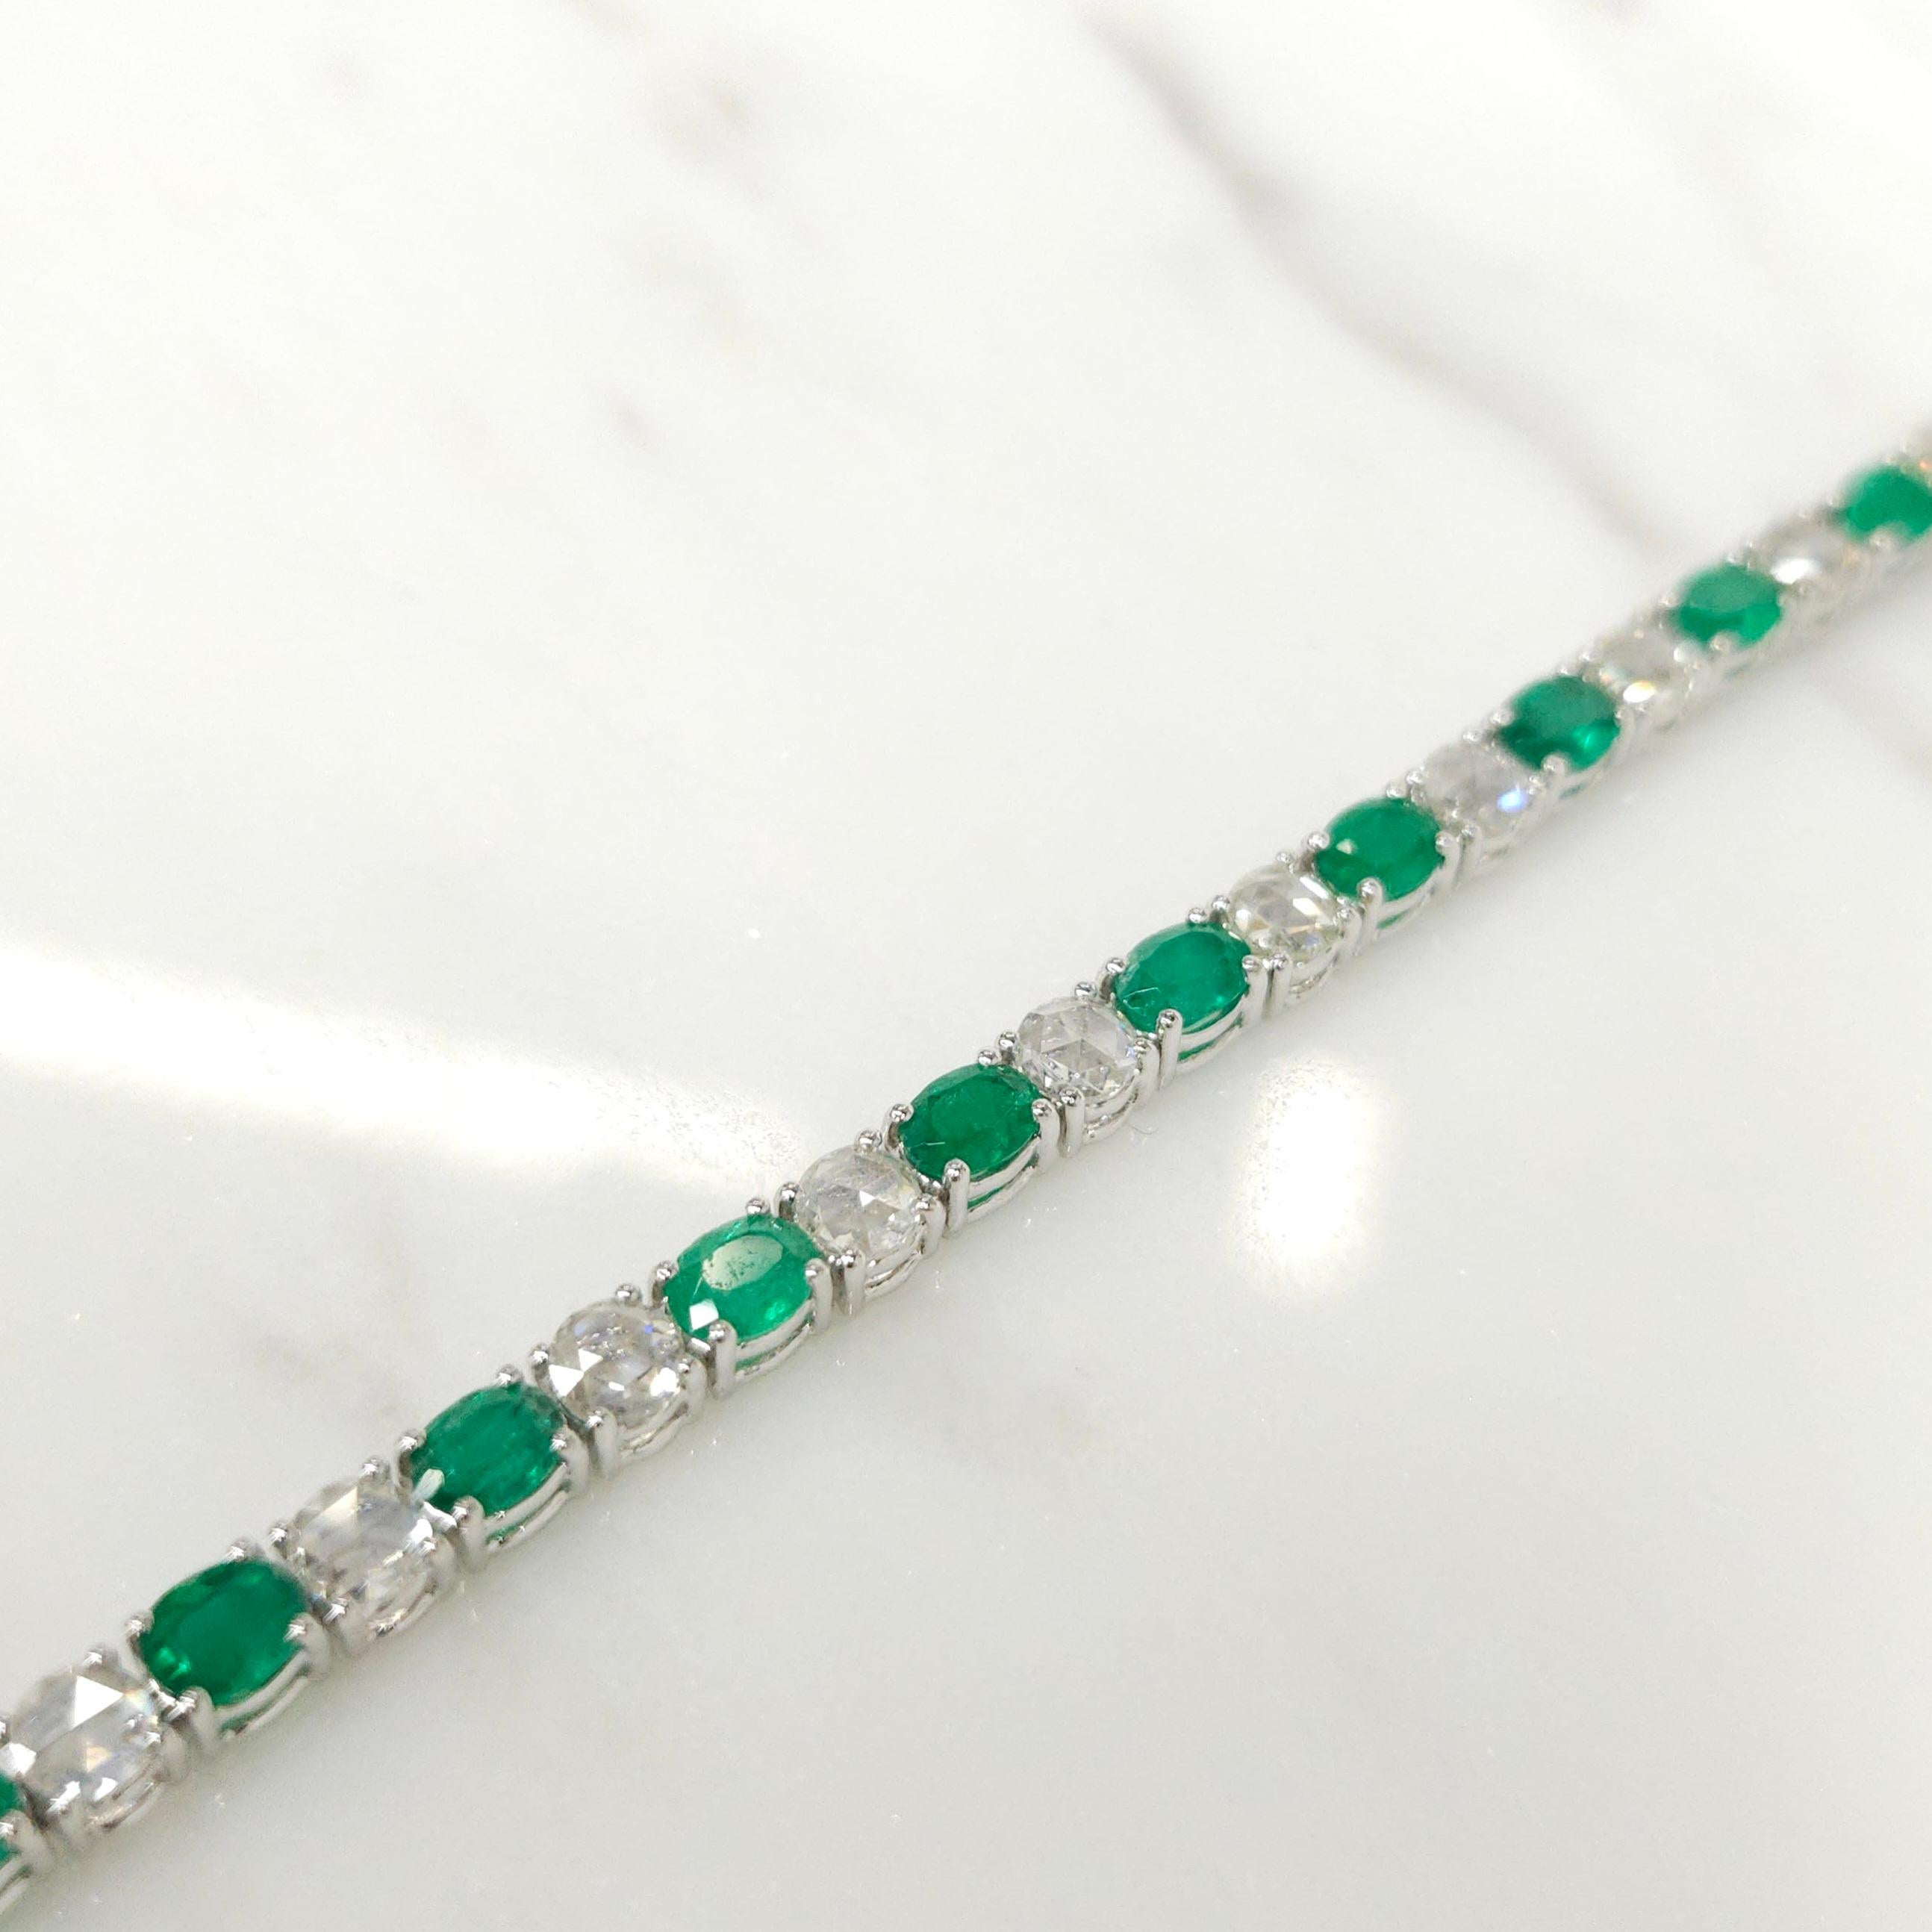 Introducing the exquisite 18K white gold tennis bracelet, adorned with alternating 3.76 Ct oval cut emeralds and 2.37 Ct round rose cut white diamonds. This stunning piece is not only a symbol of luxury but also a testament to the timeless beauty of